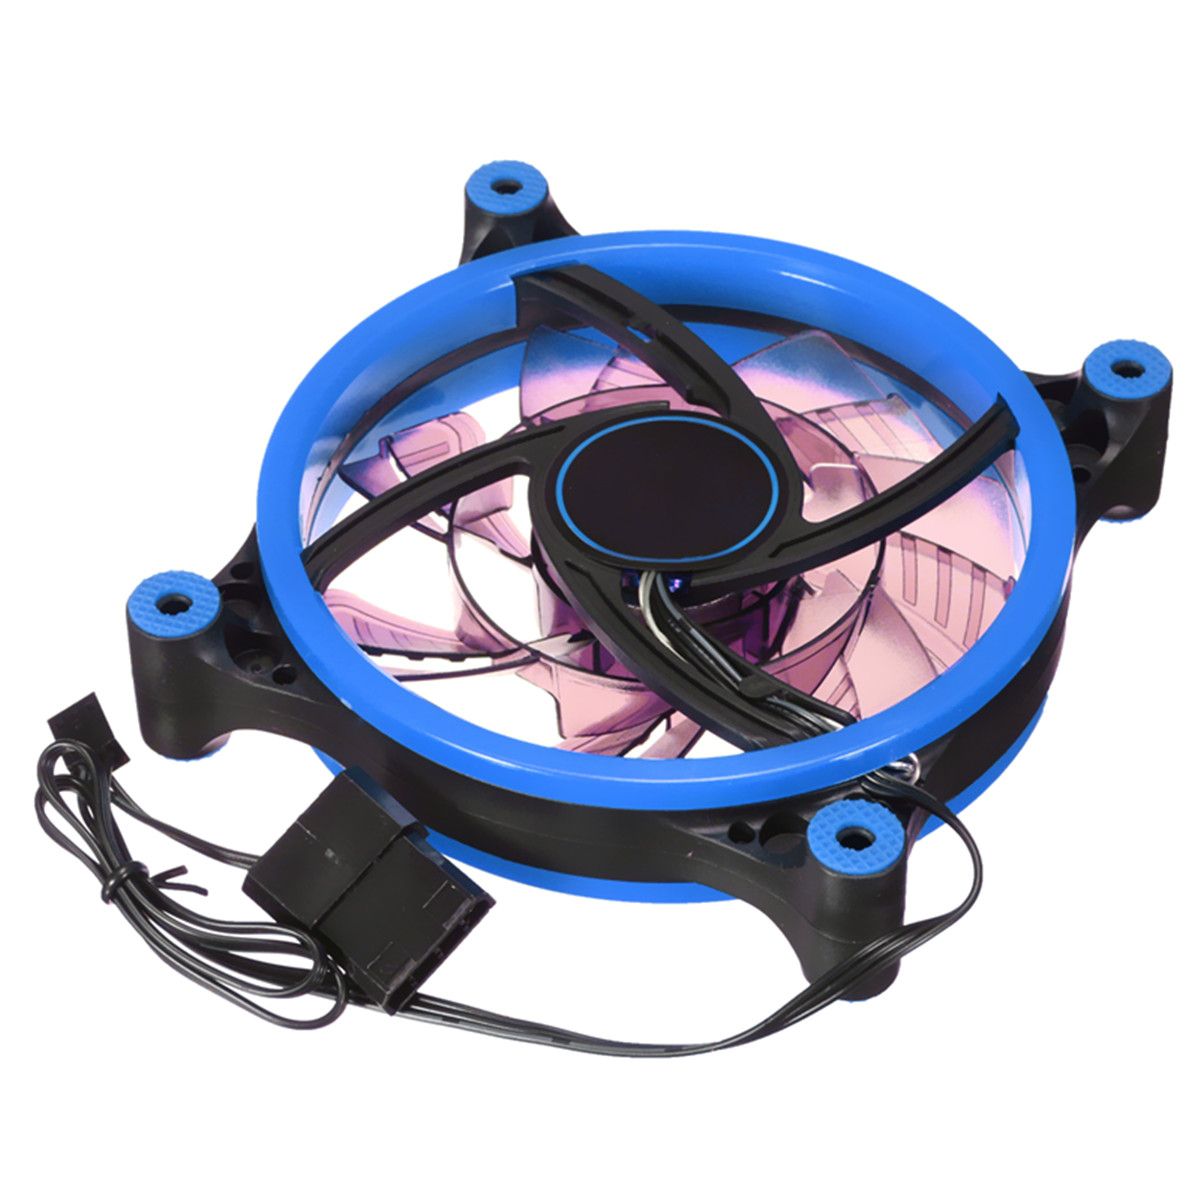 Replacement-118cm-3pin-4pin-LED-Computer-Cooling-Fan-1200-1500rpm-for-Bitcoin-Mining-PC-Case-1258209